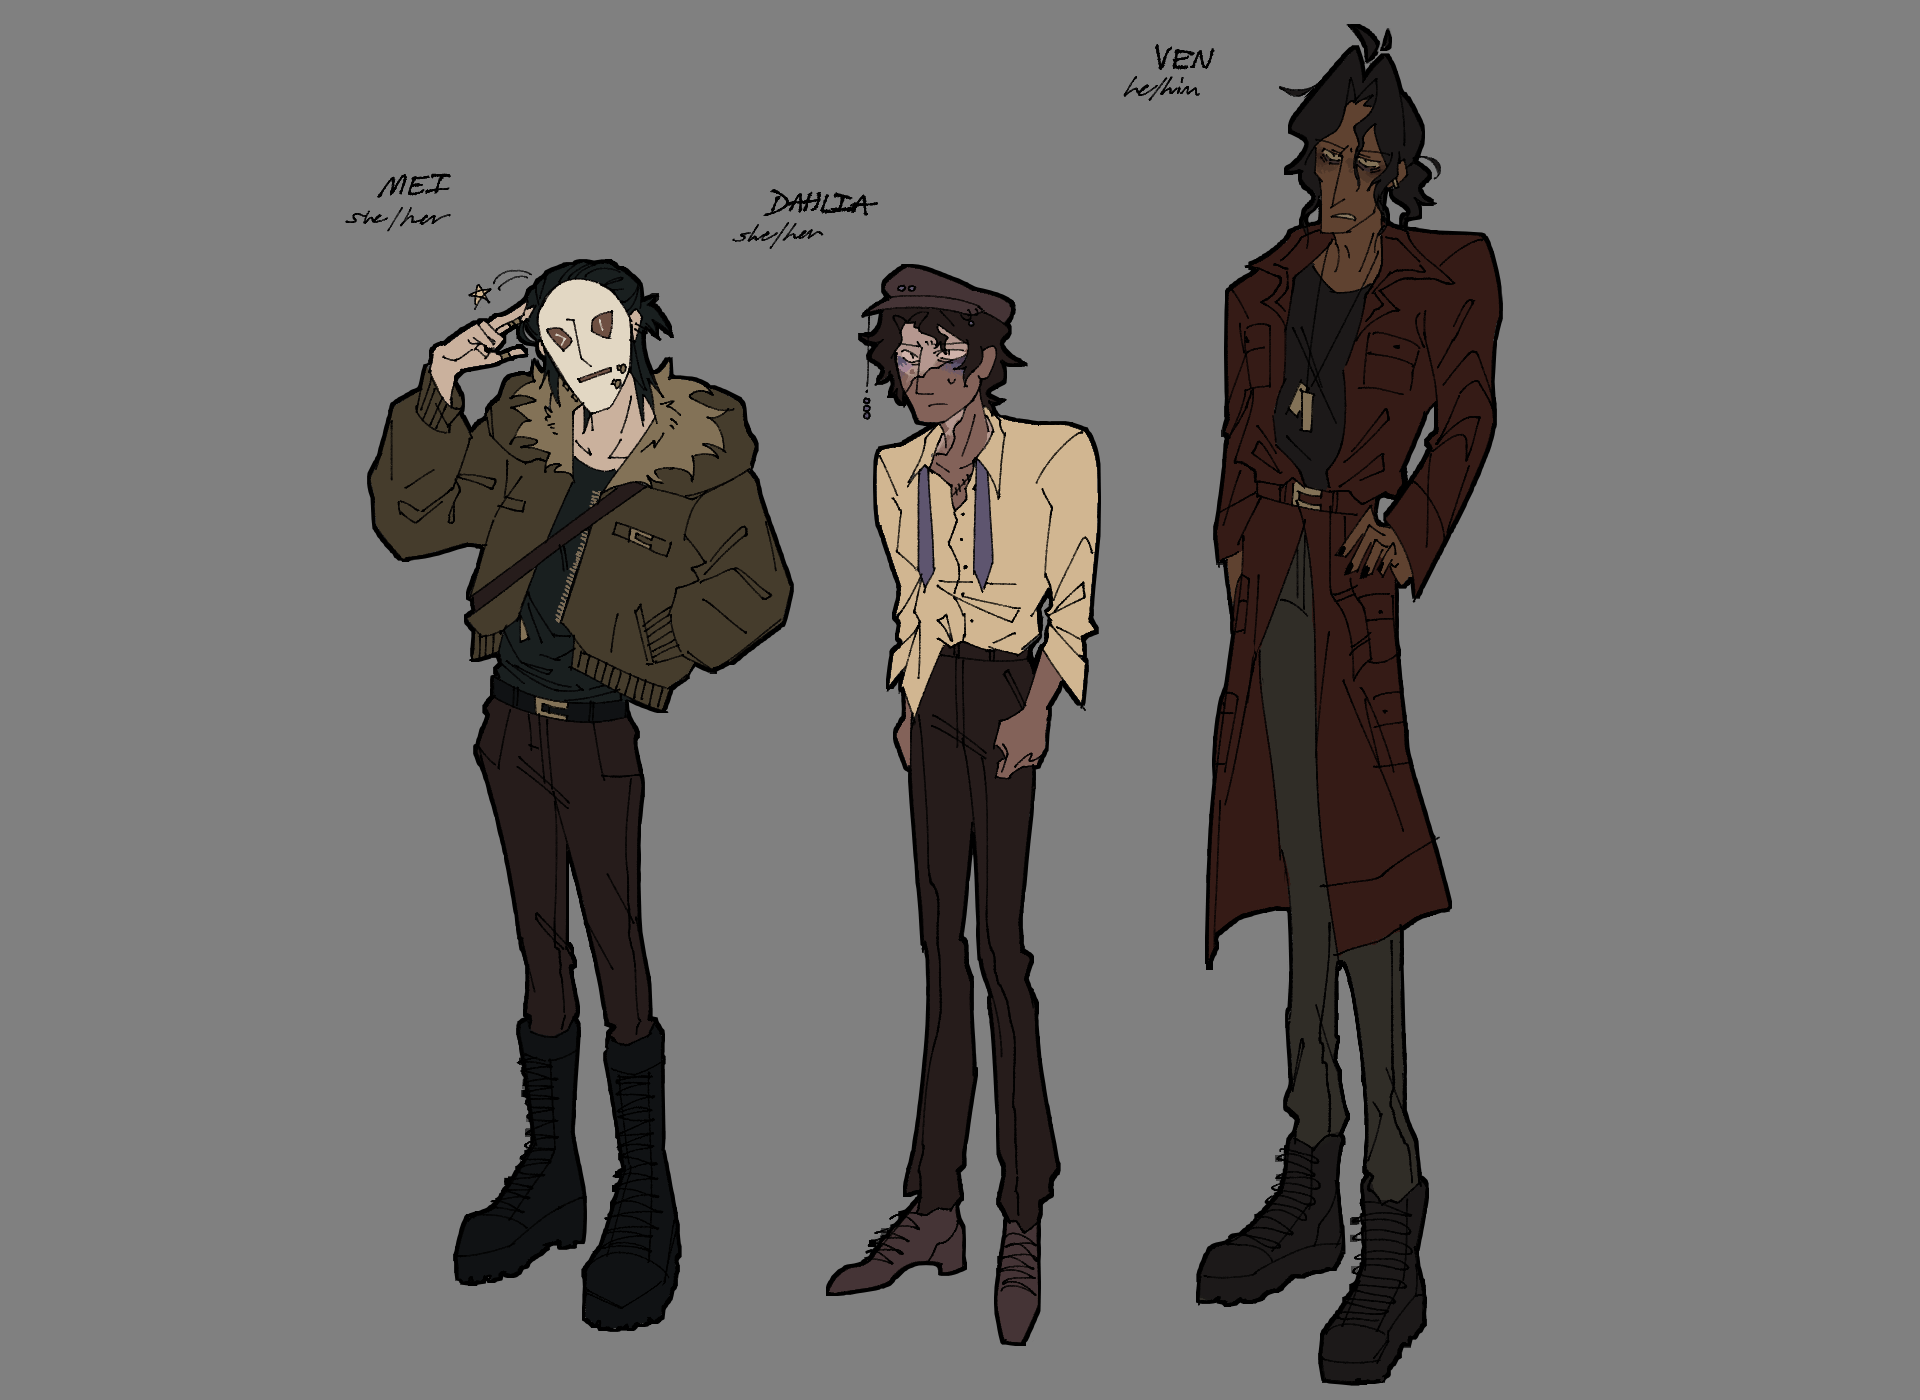 A lineup of my characters Mei, Dahlia, and Ven.